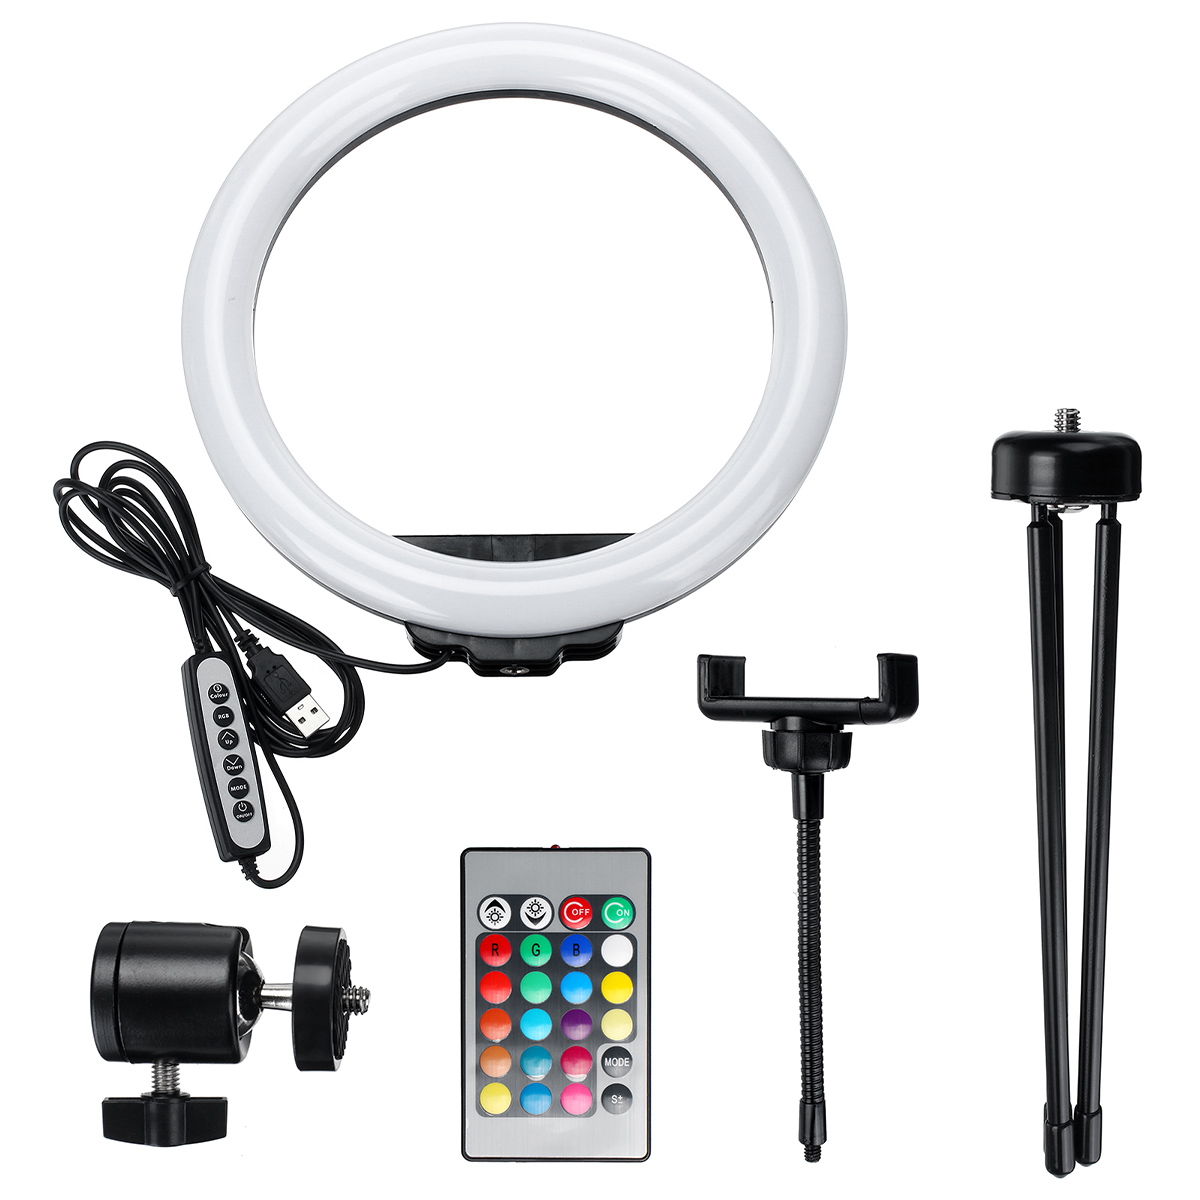 10-inch-LED-Ring-Fill-Light-3-Modes-of-Color-Temperature-Colorful-RGB-Live-Broadcast-Desktop-Phone-H-1871503-13